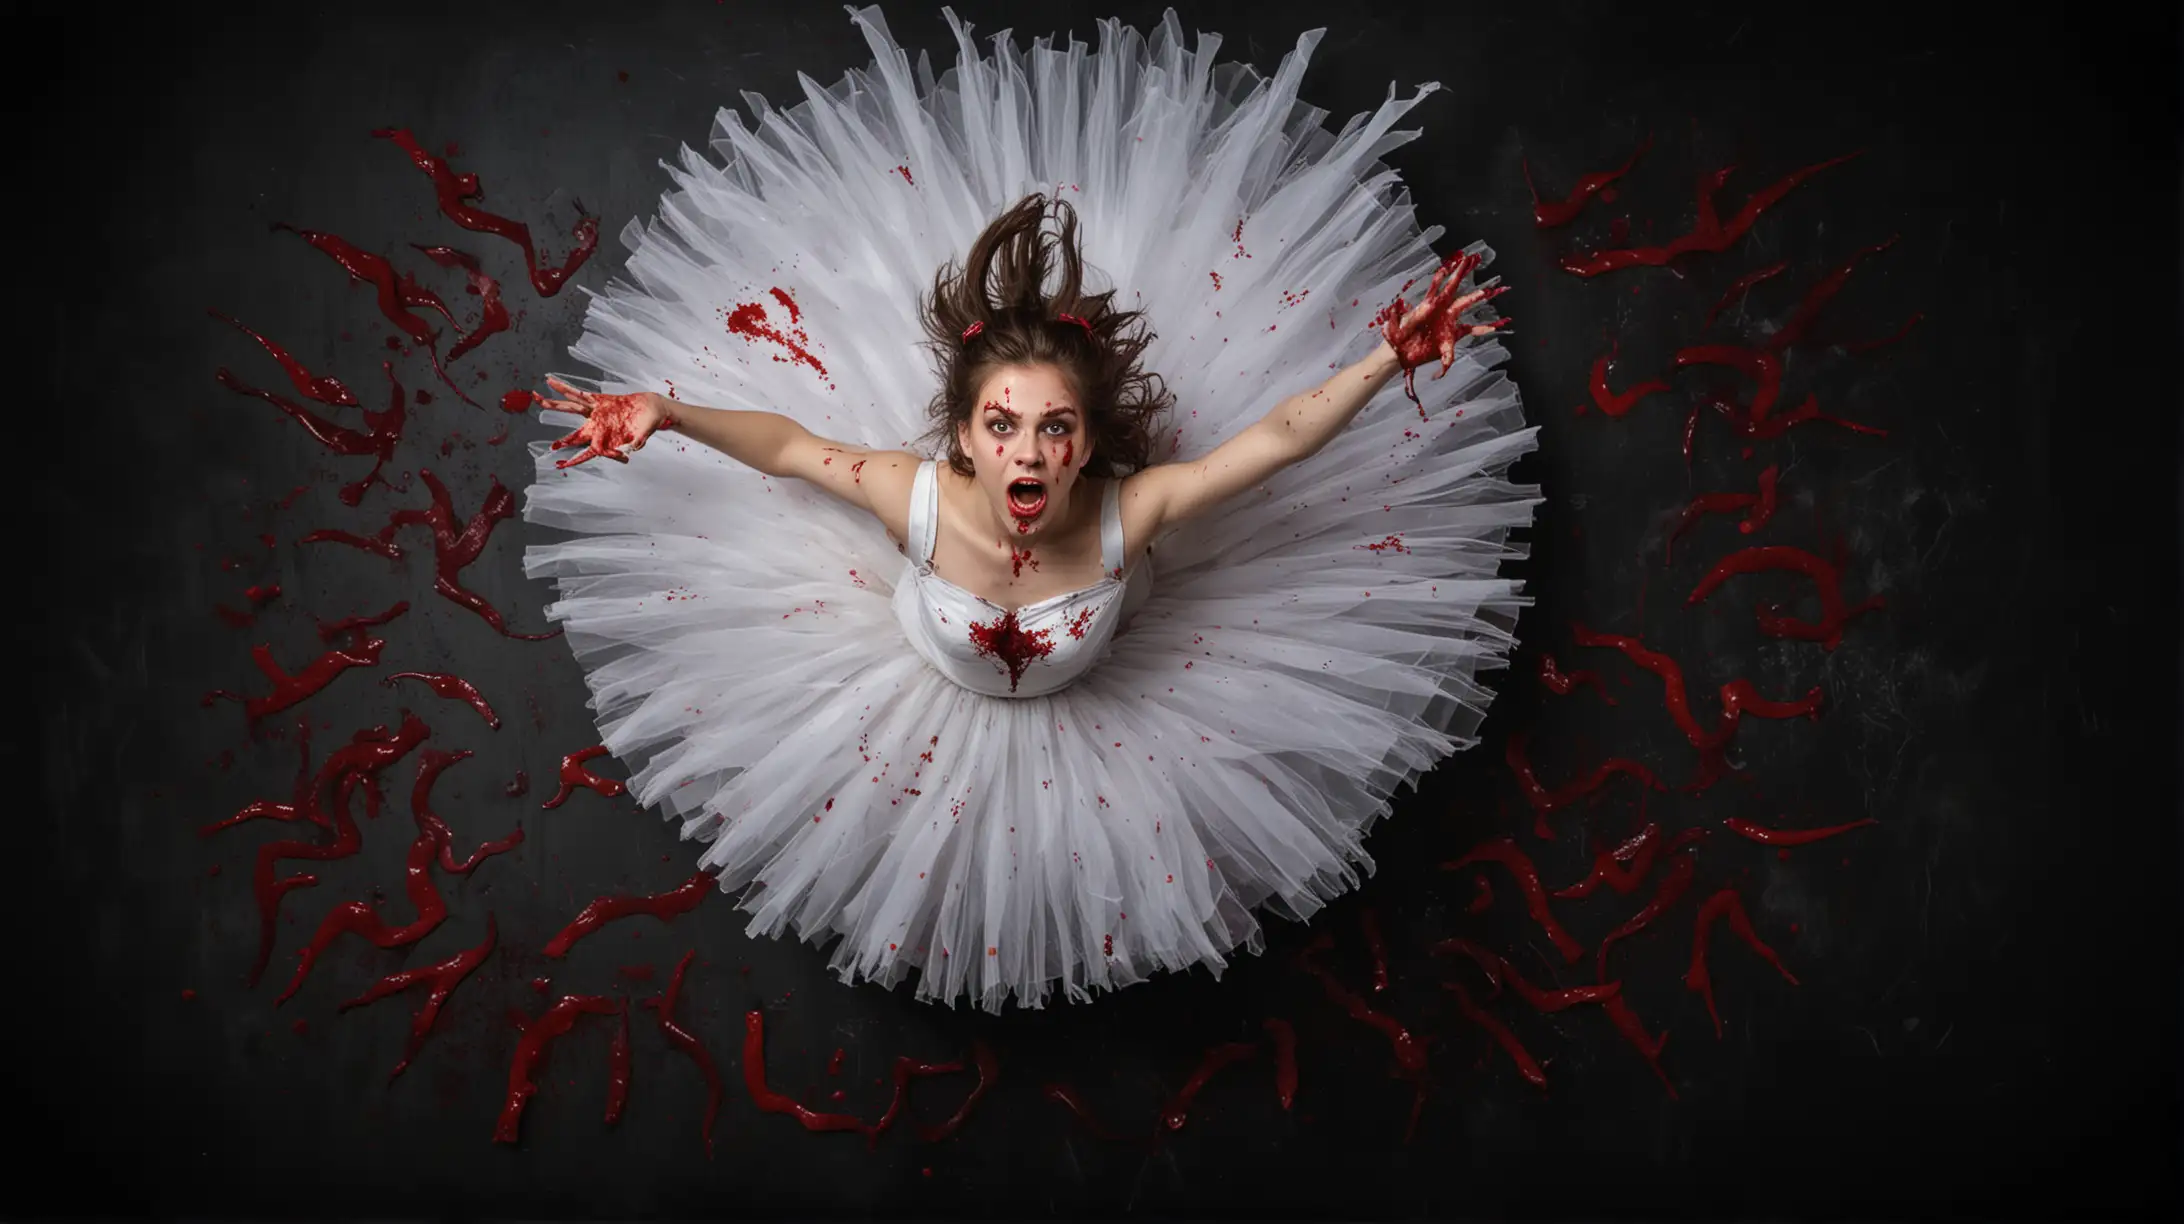 Sinister Teenage Ballerina BloodDrenched Demoness in White Tutu